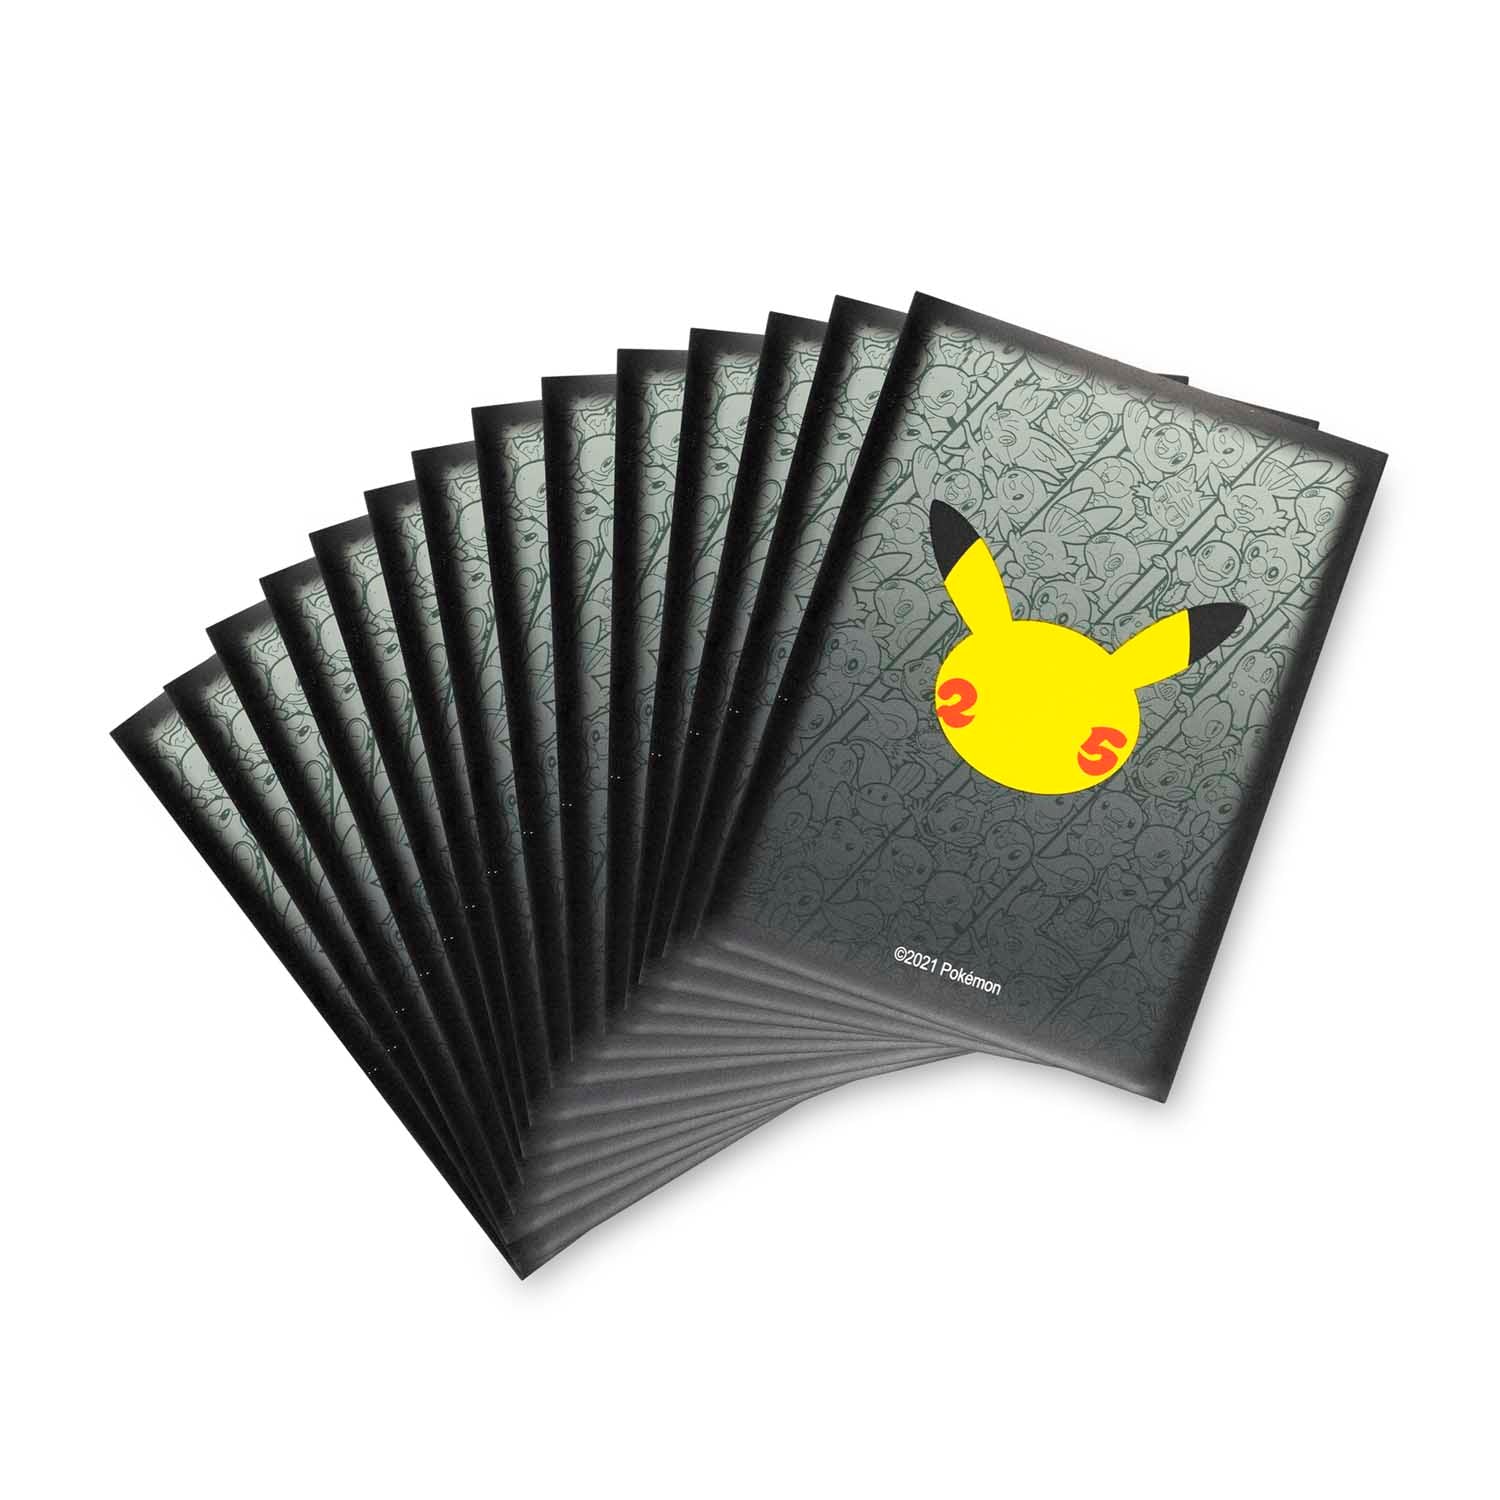 Celebrations: 25th Anniversary - Card Sleeves (Black) | Total Play